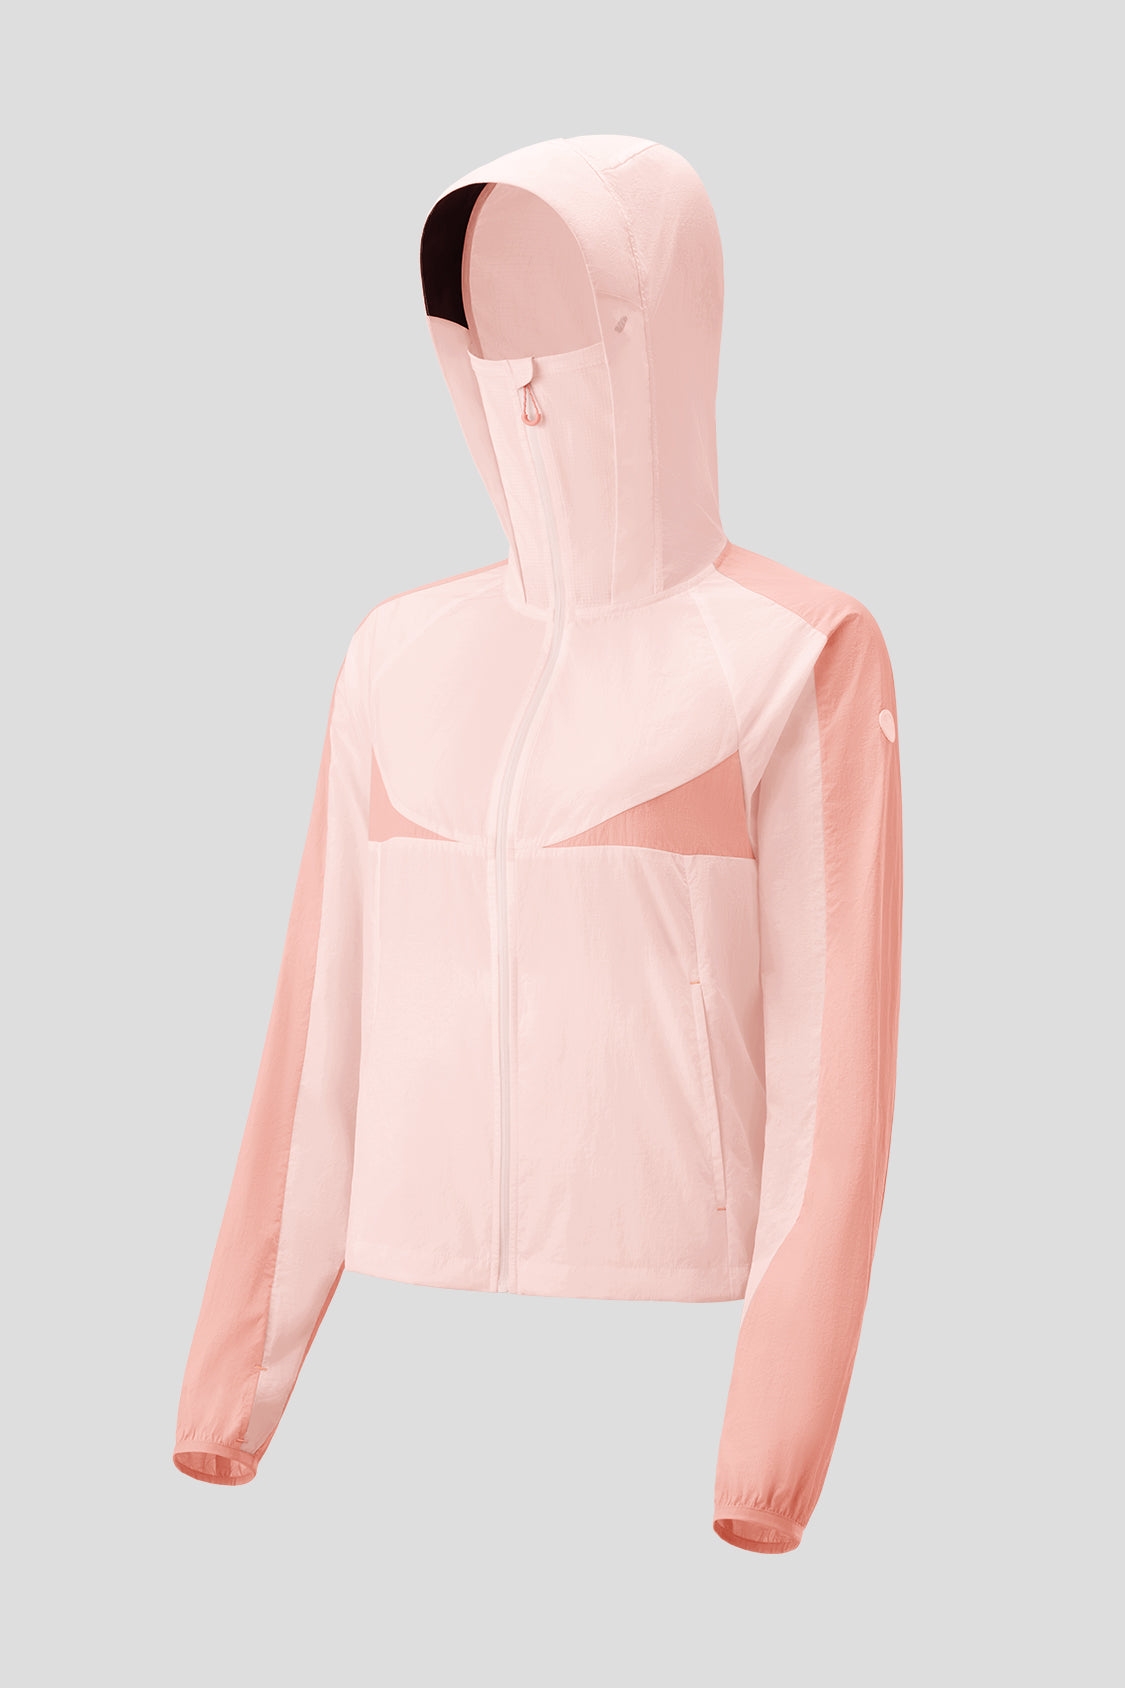 beneunder women's sun protection jacket upf50+ #color_bayberry pink - misty pink